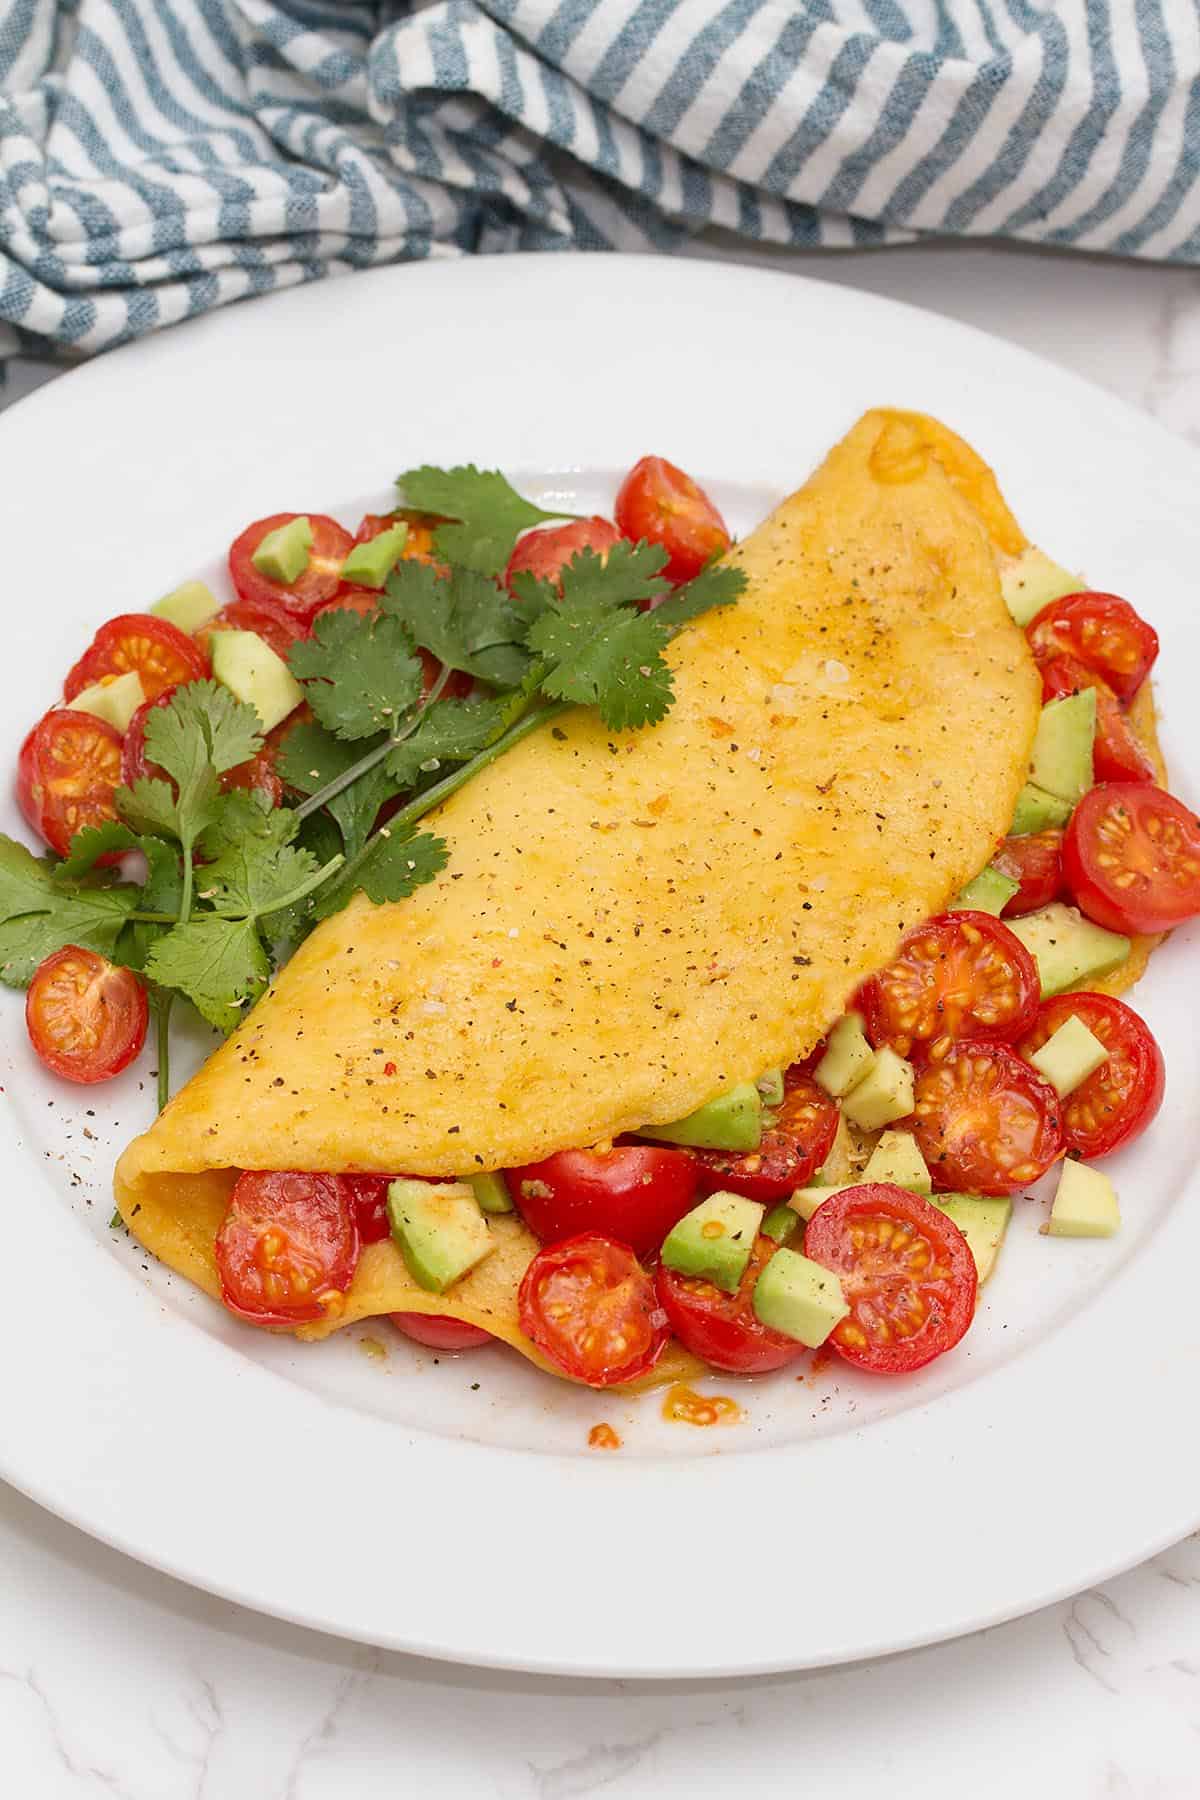 Just egg omelette with tomatoes, avocado and cilantro on a plate.